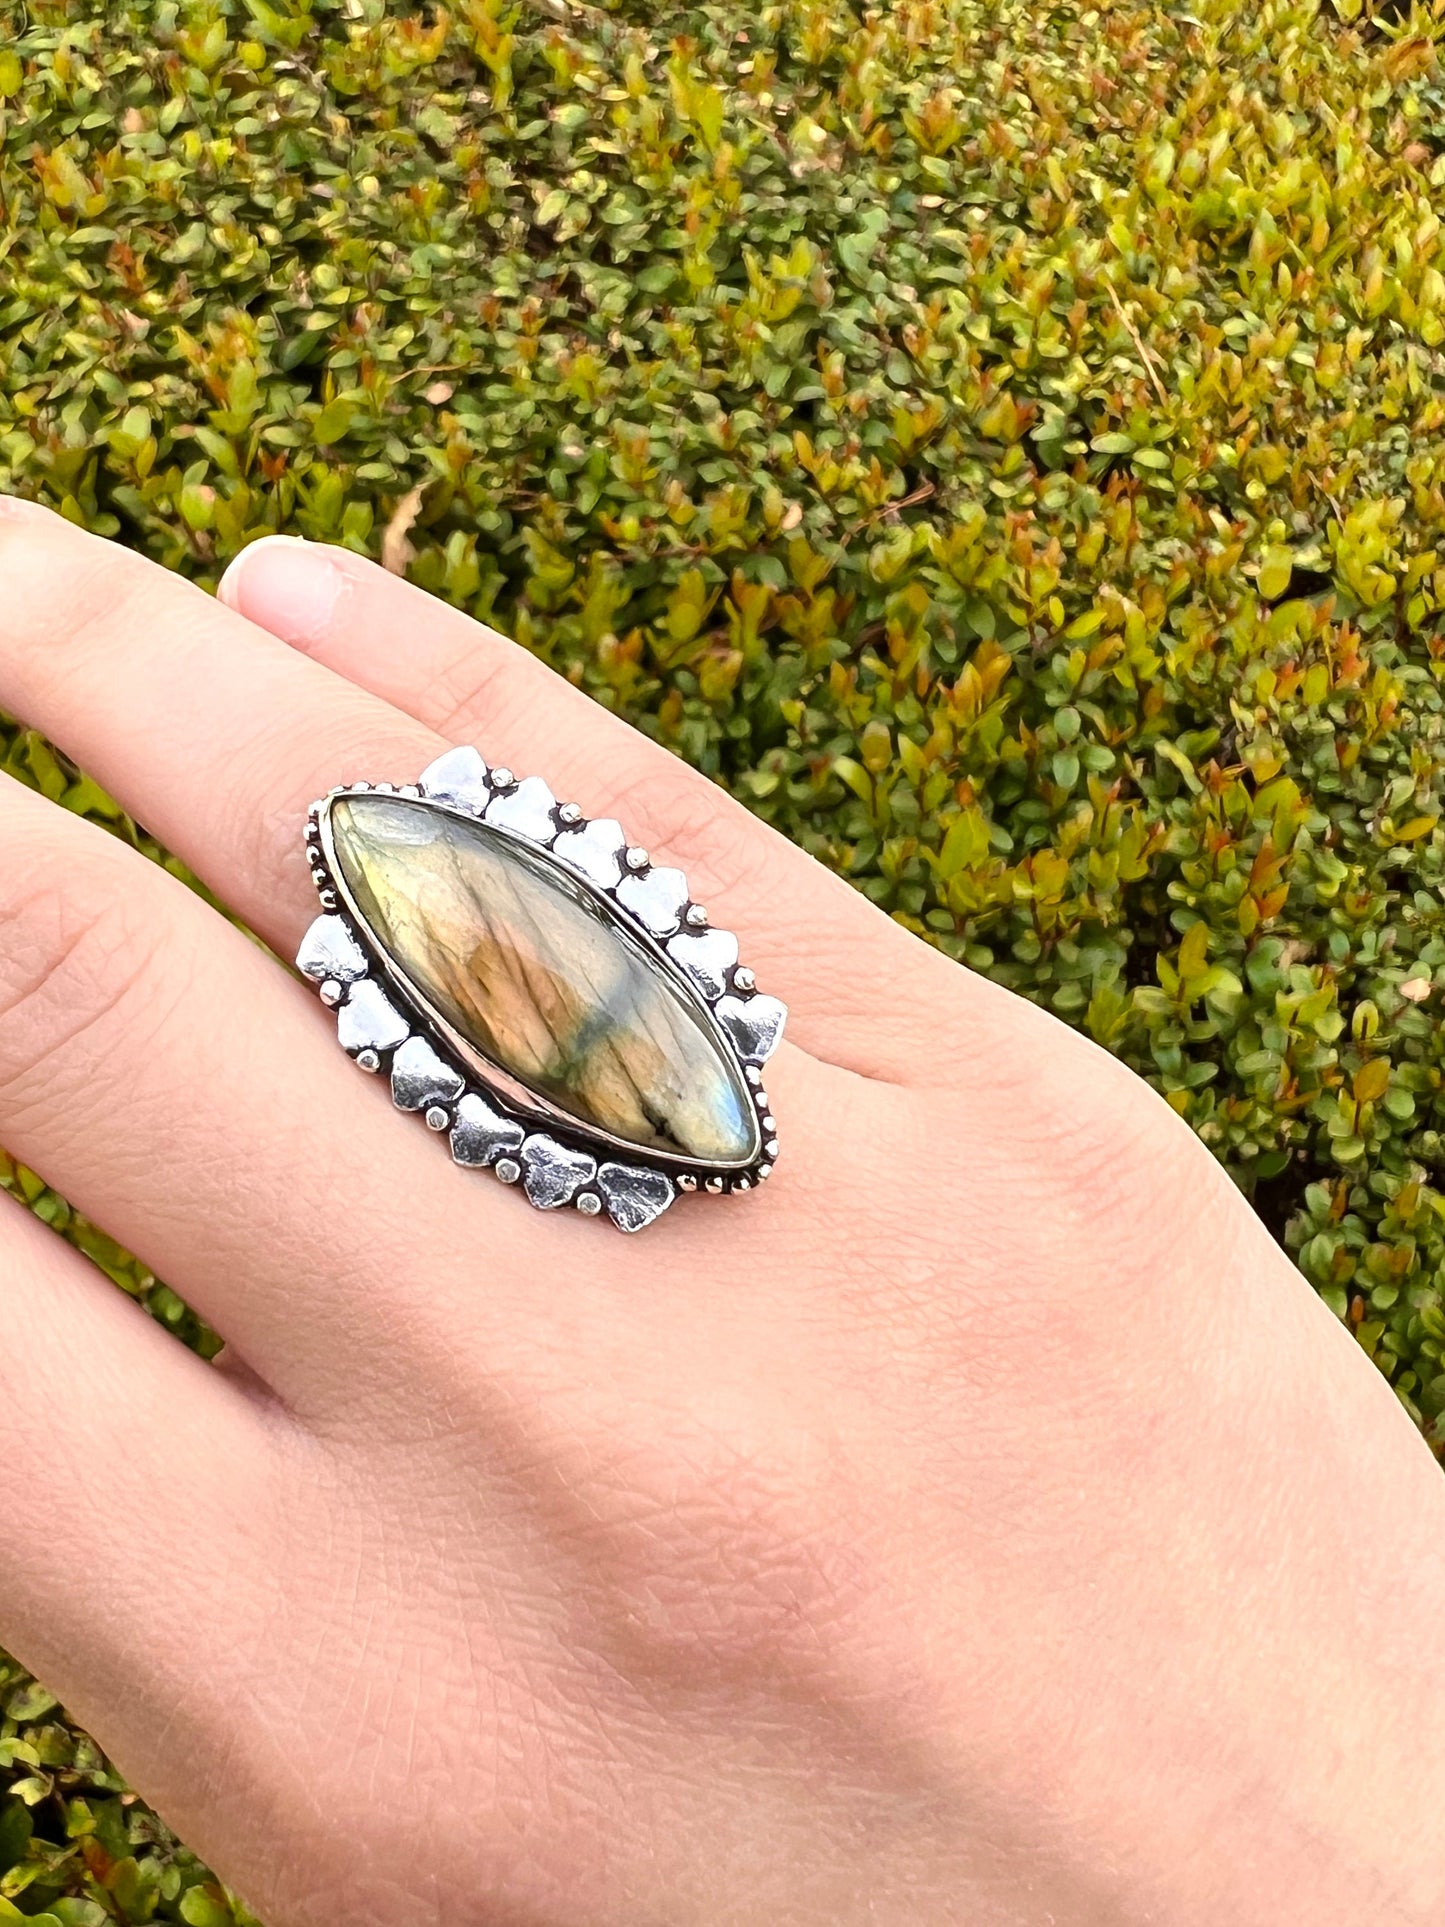 Faceted Labradorite Ring In Sterling Silver Size US 8 1/2 Boho Crystal Ring Unique Gift For Women GypsyJewelry